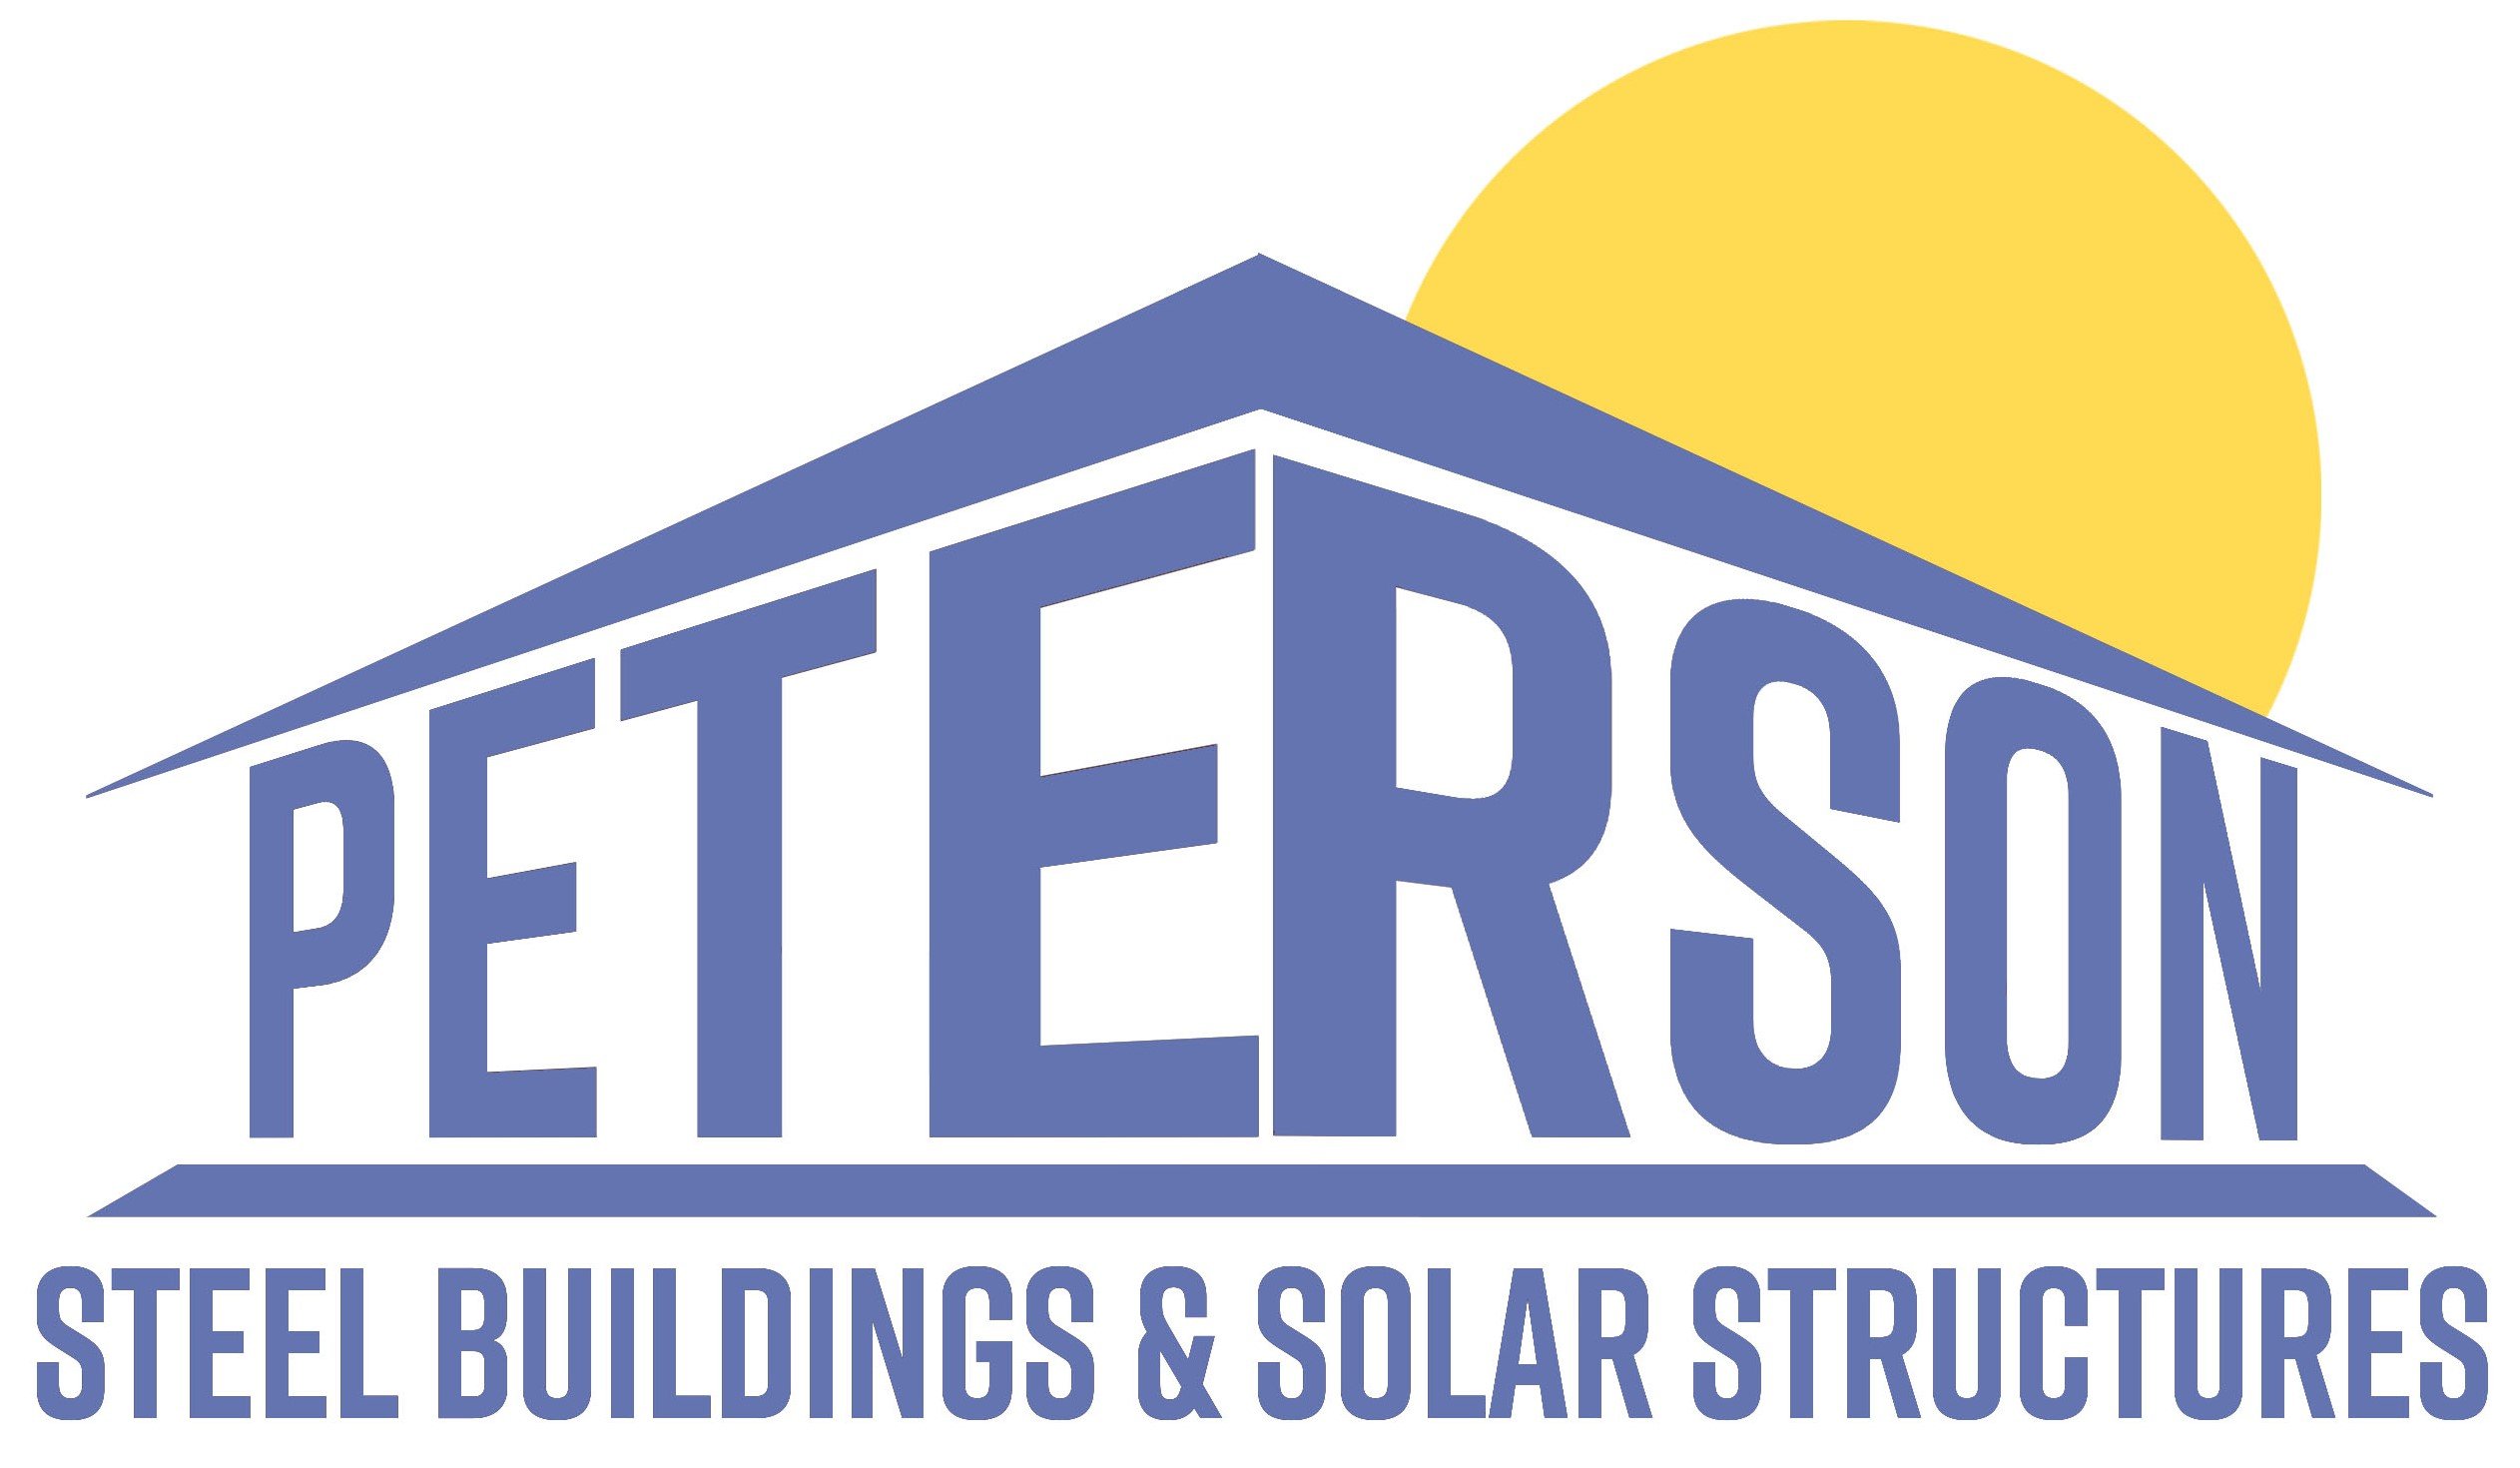 Peterson Steel Buildings and Solar Structures Logo